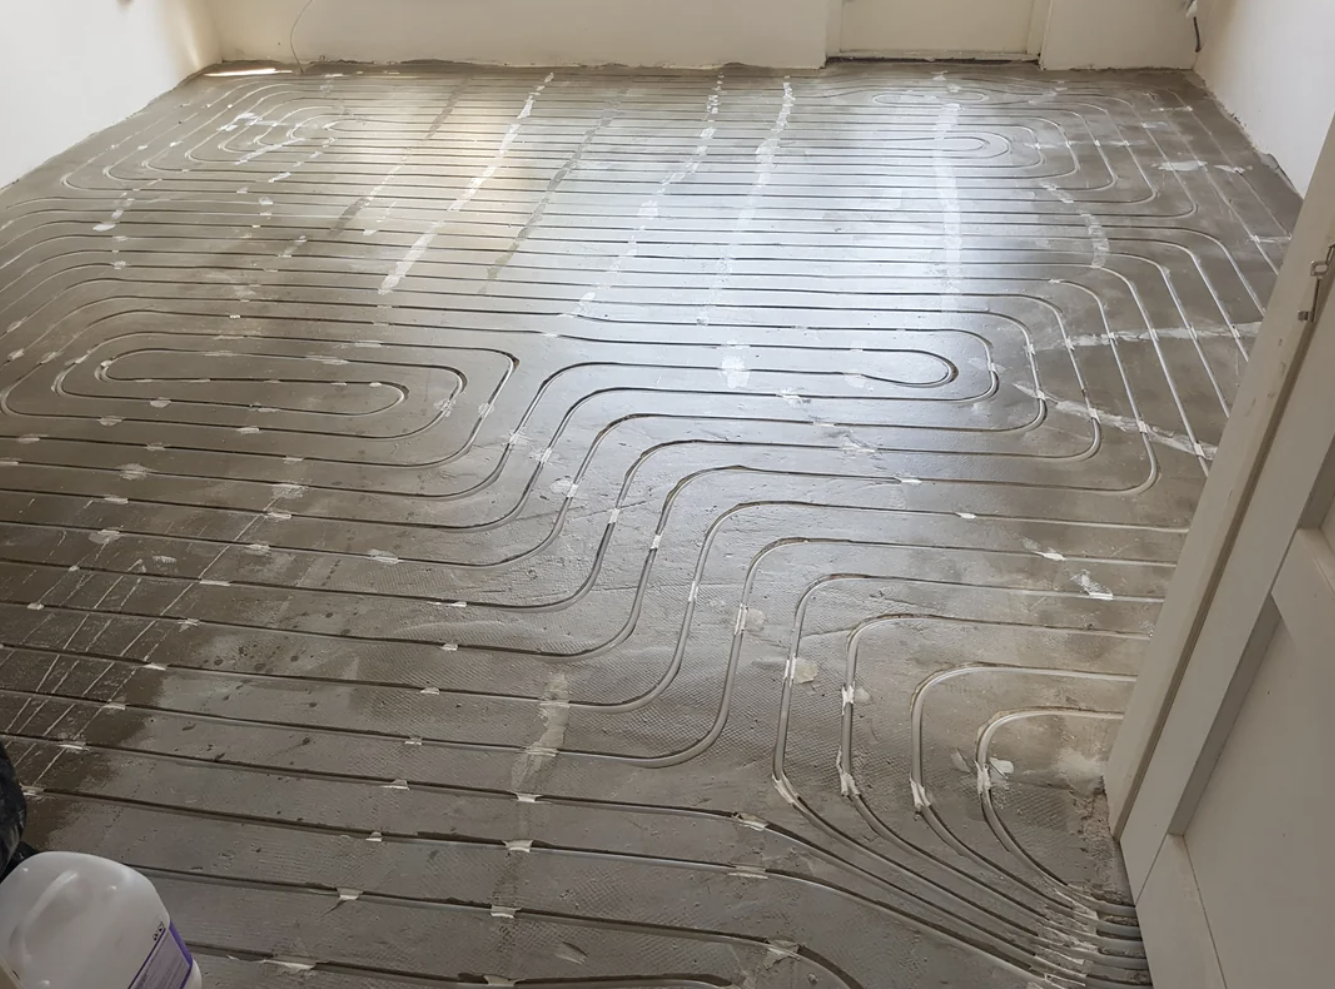 A floor with heating coils